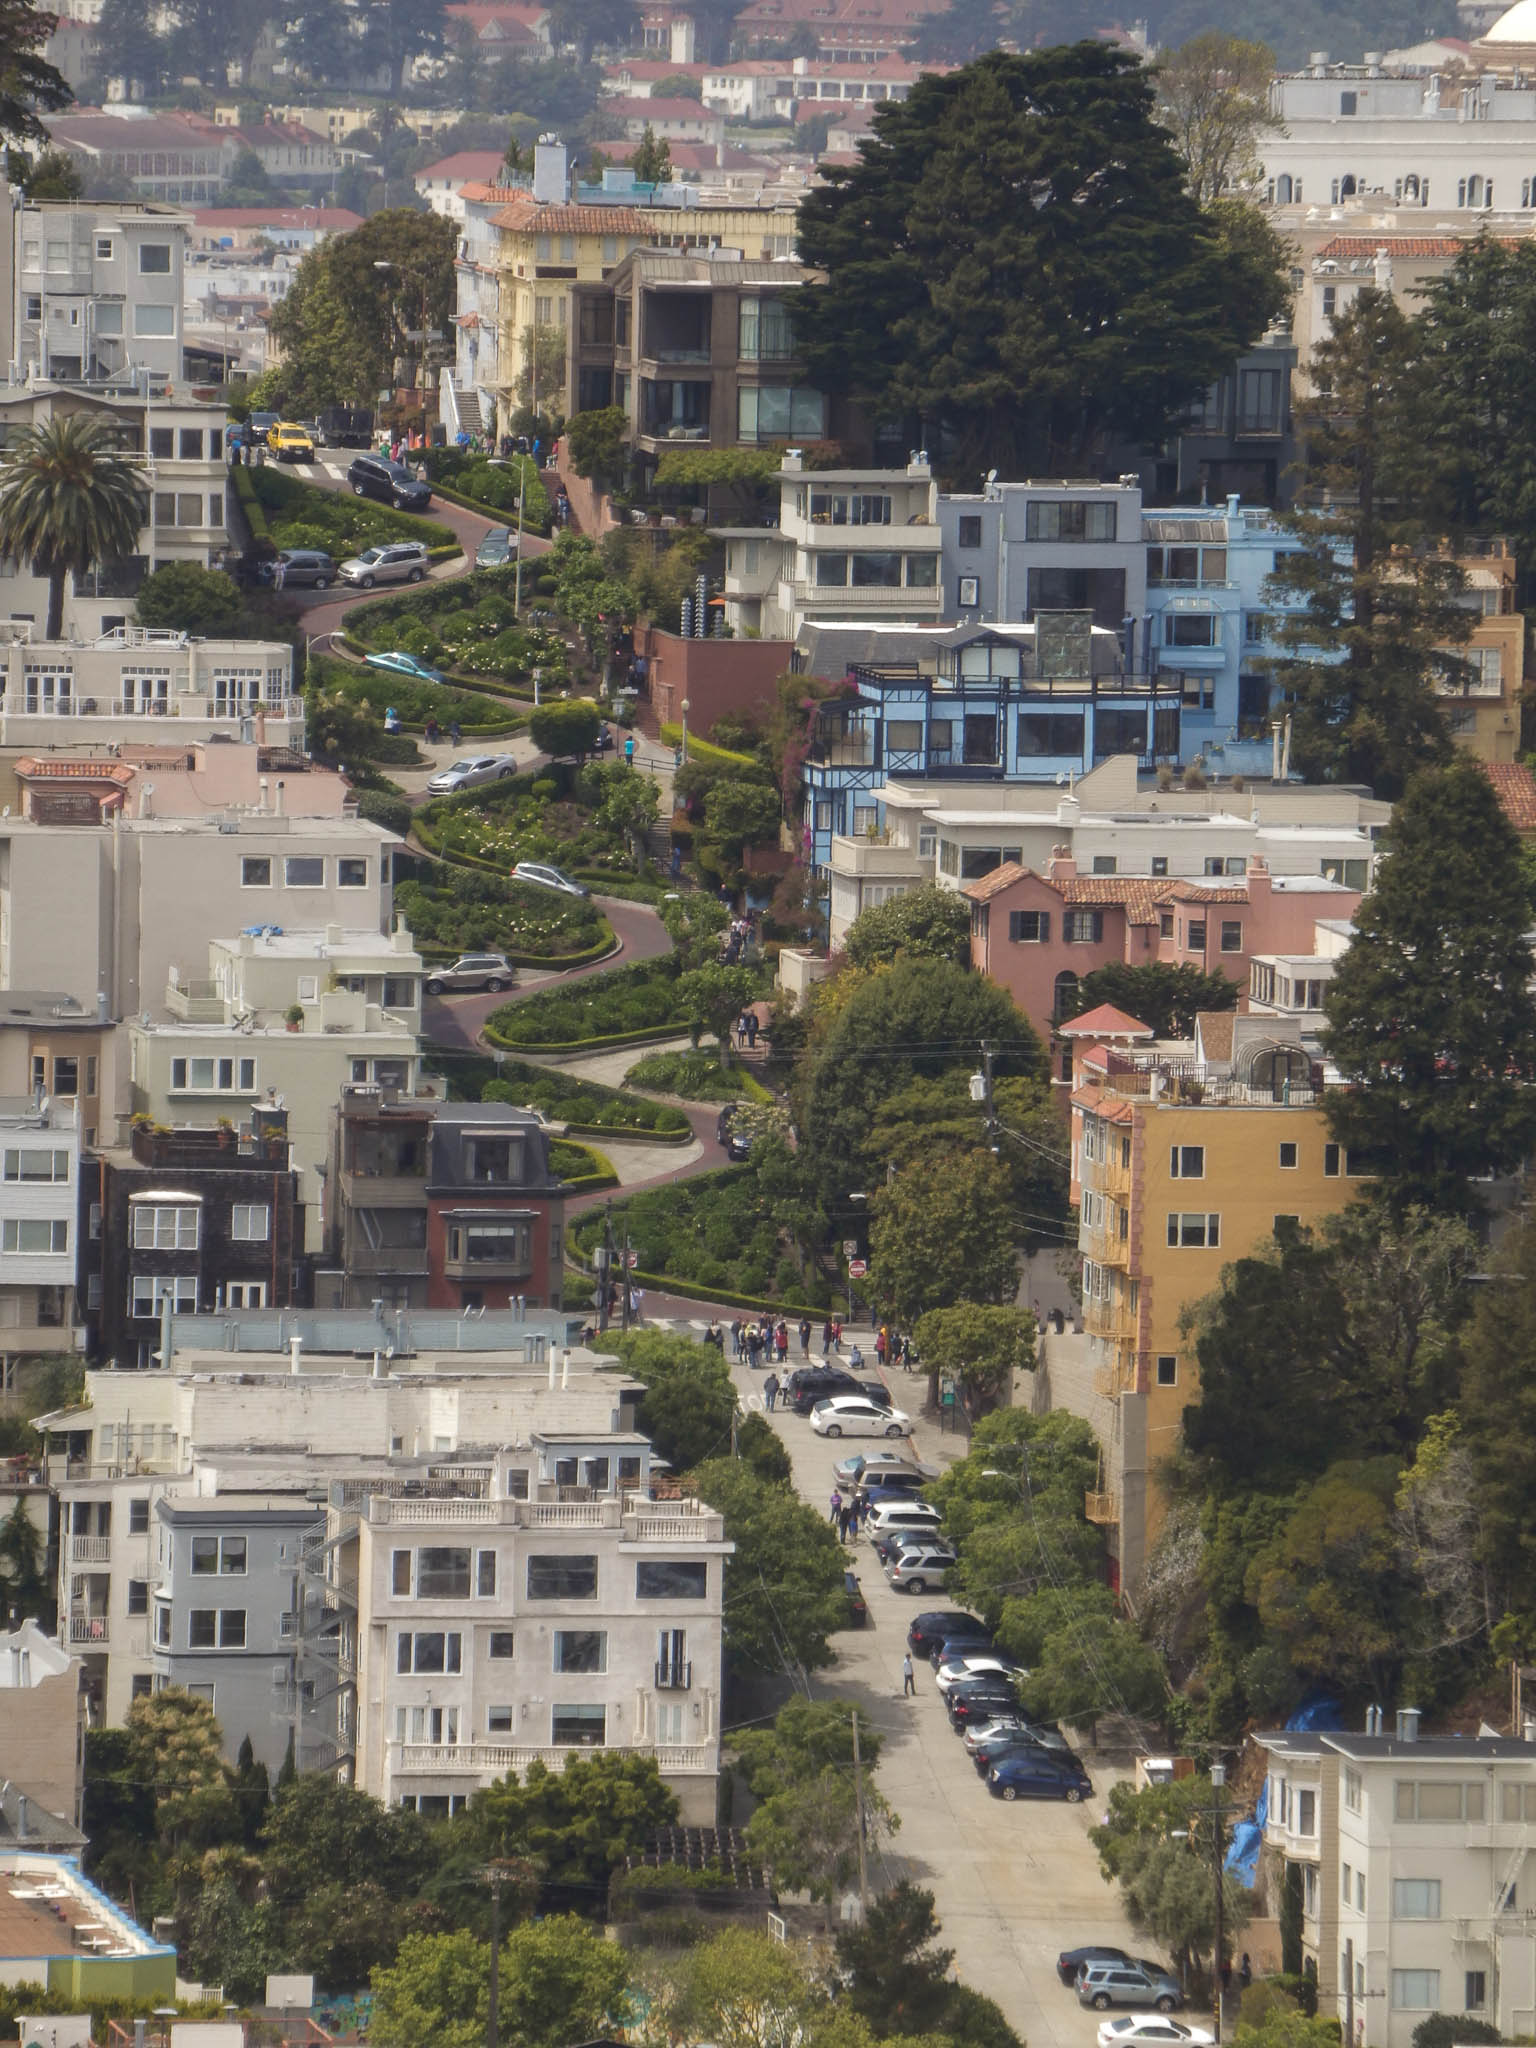 Lombard Street as seen from Coit tower